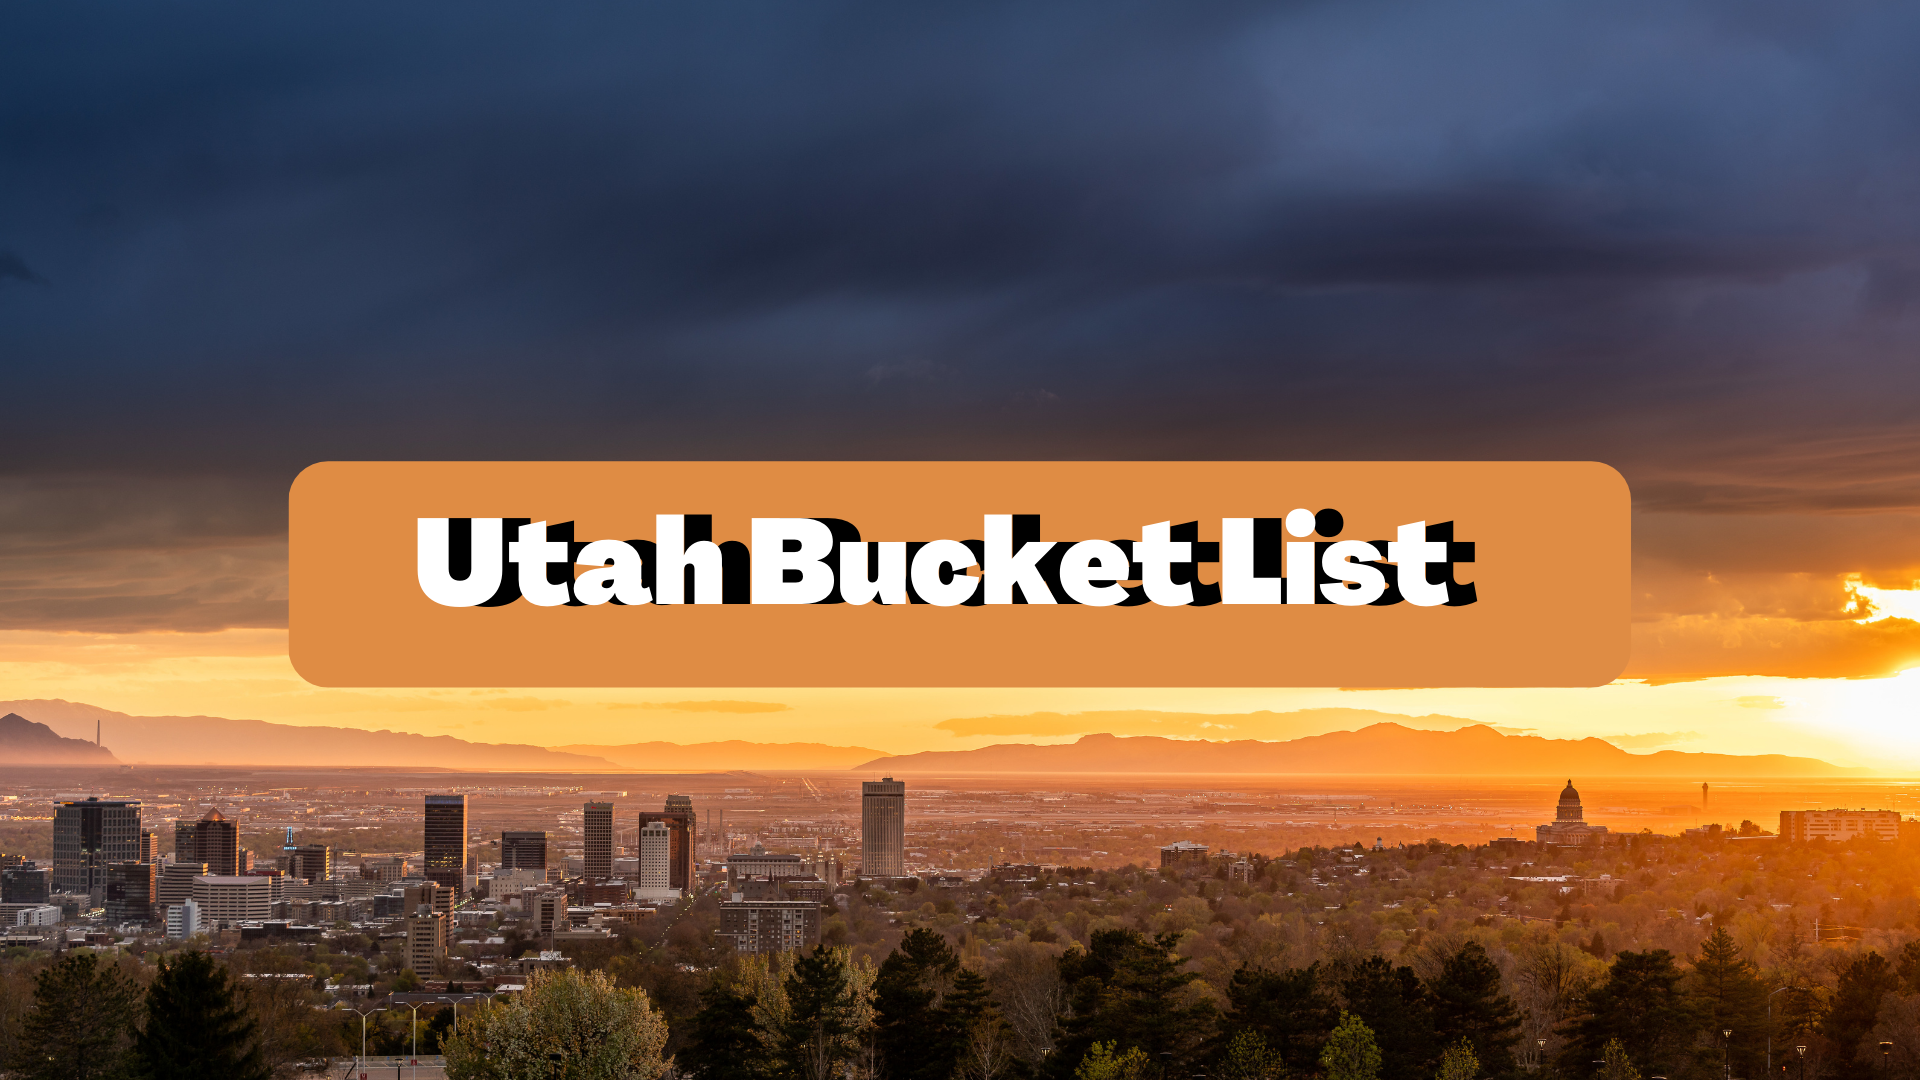 Sunset over Salt Lake Valley with text overlay that reads "Utah Bucket List"